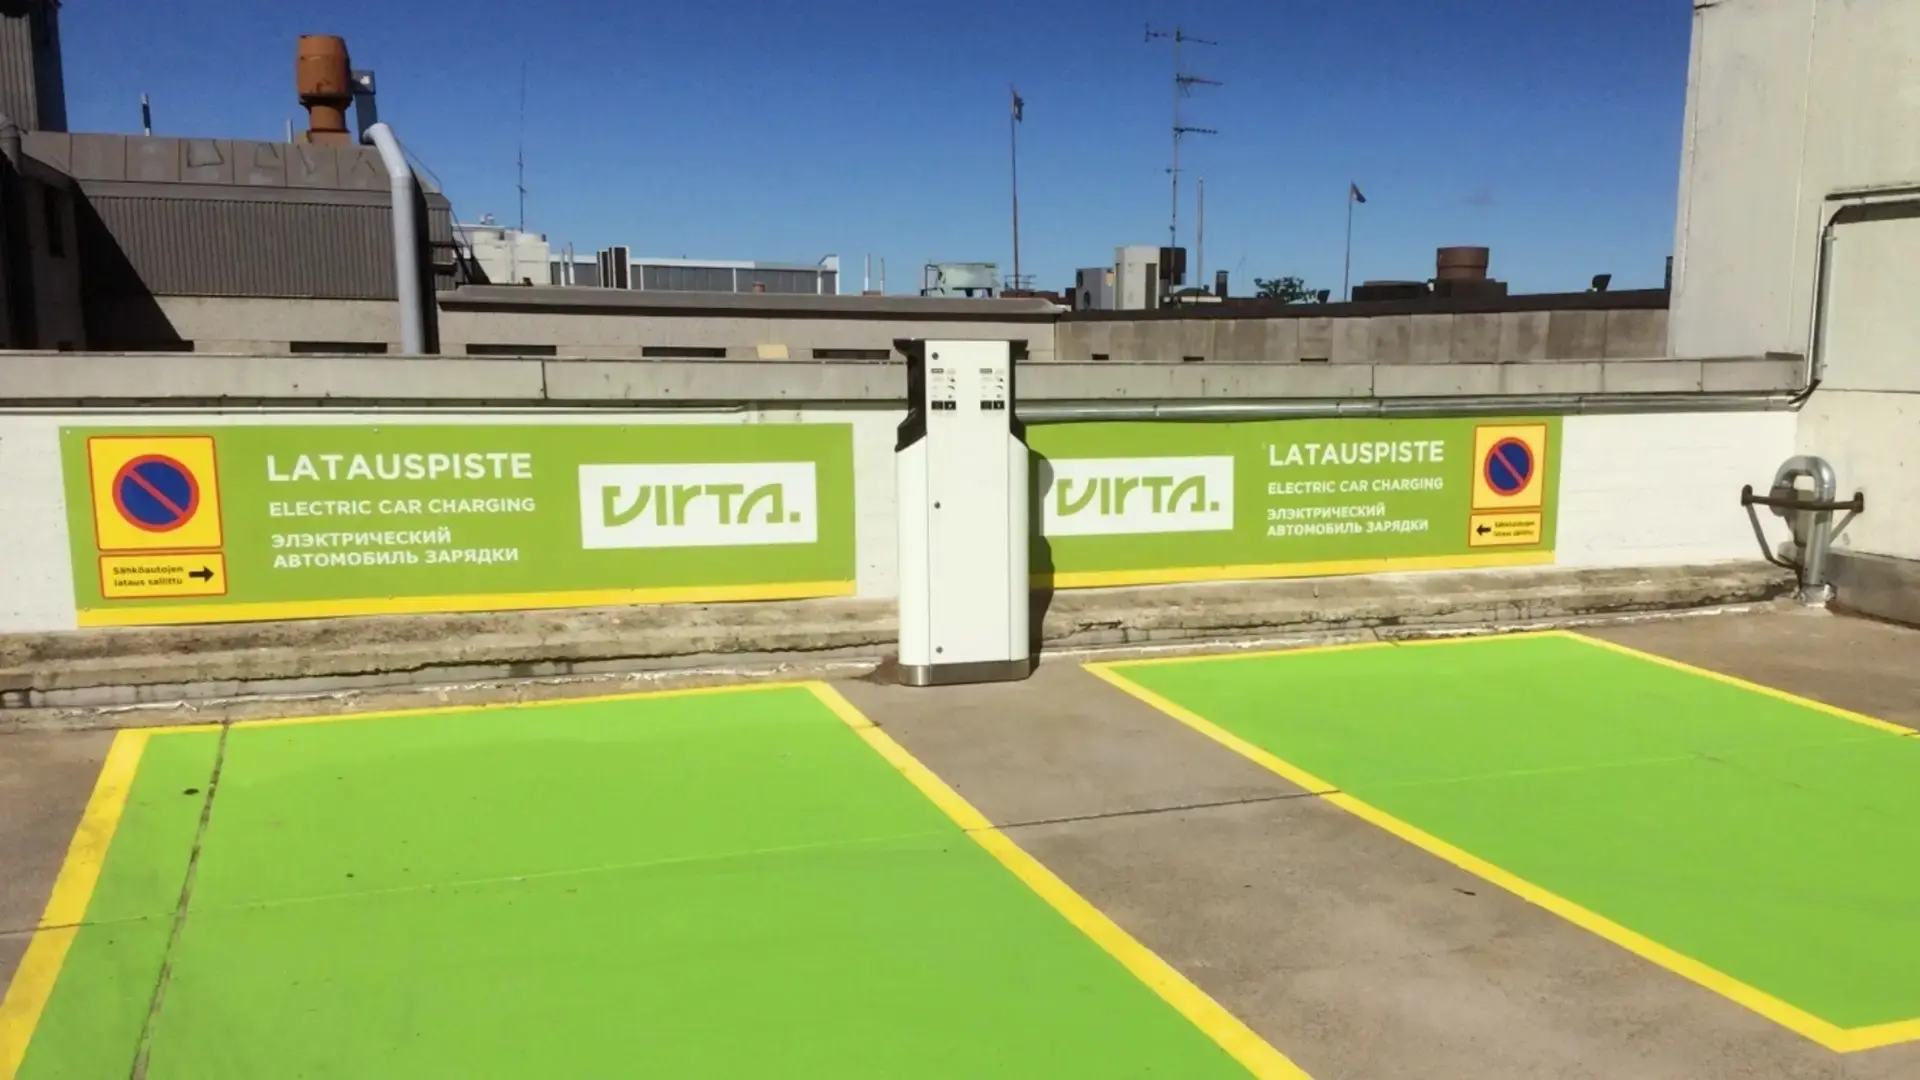 weera-parking-spots-marked-for-ev-charging